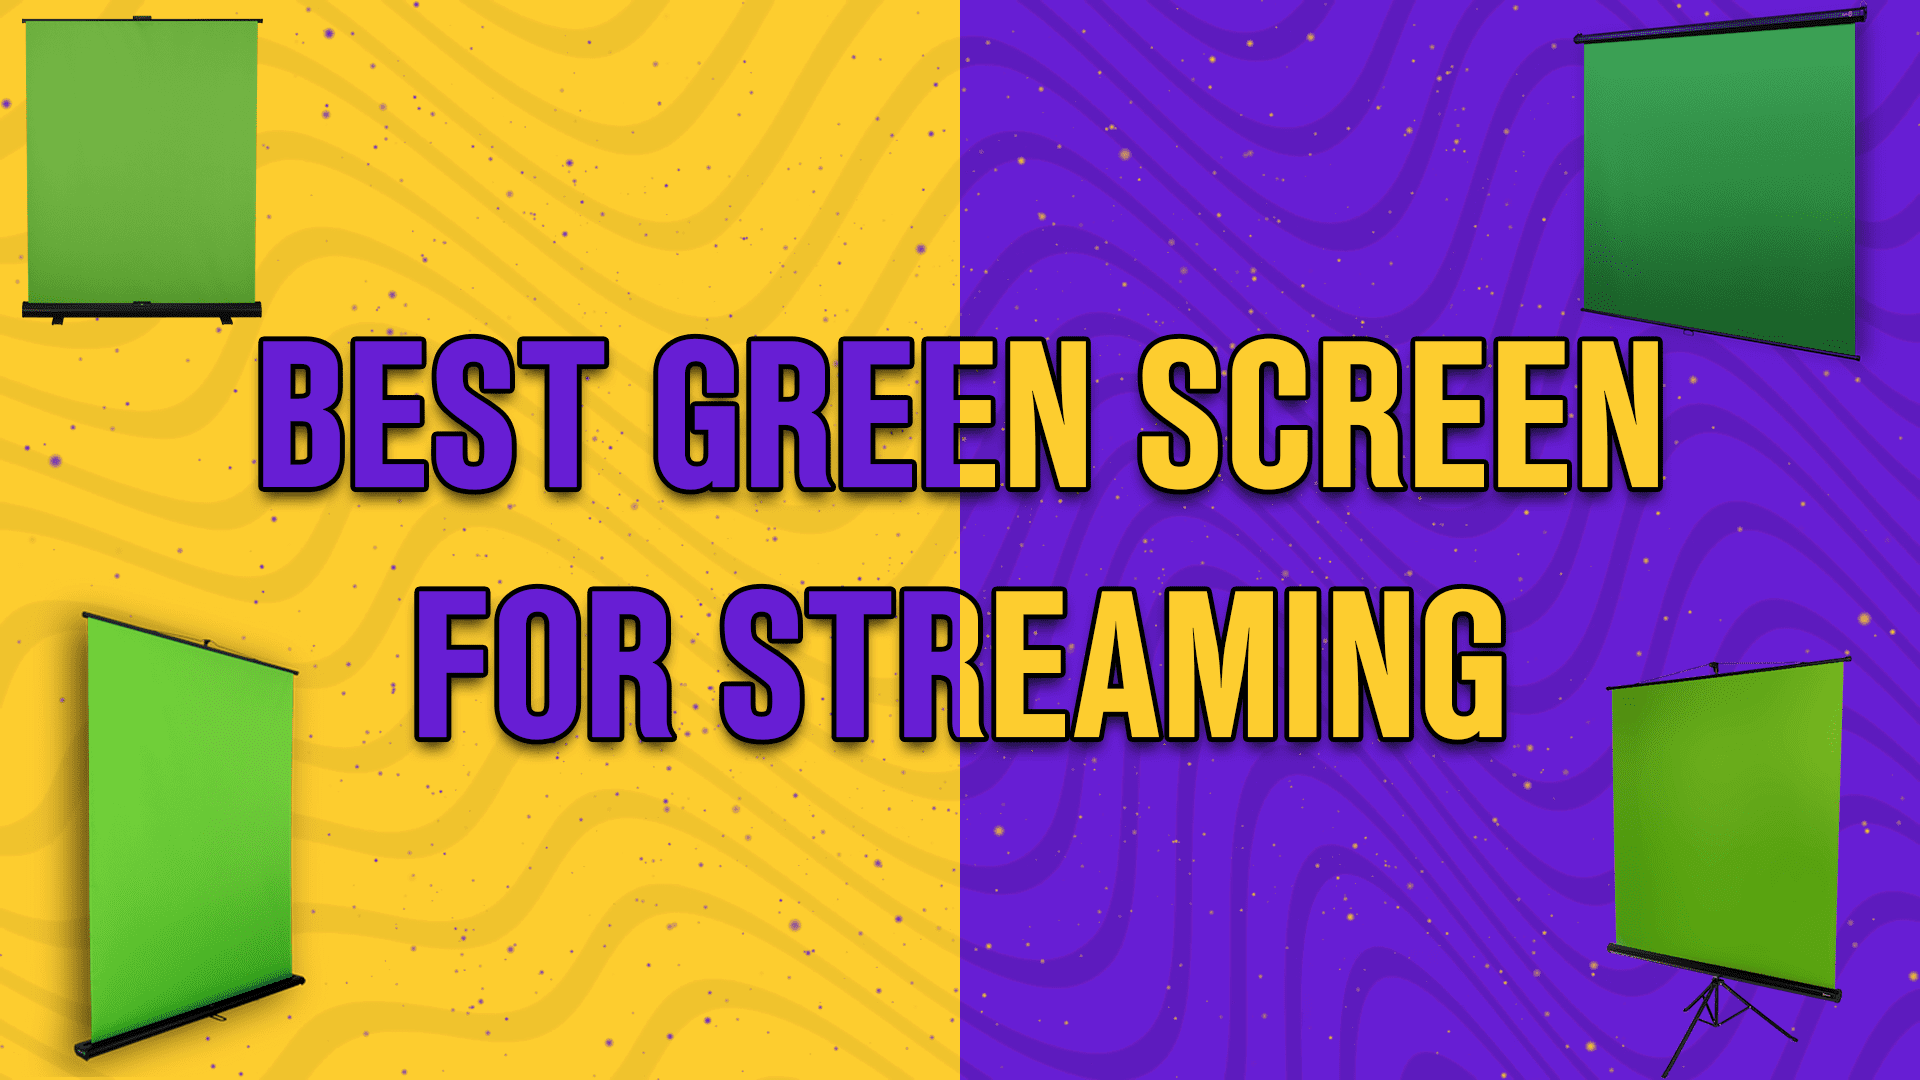 Featured image for article about best green screen for streaming by StreamBee